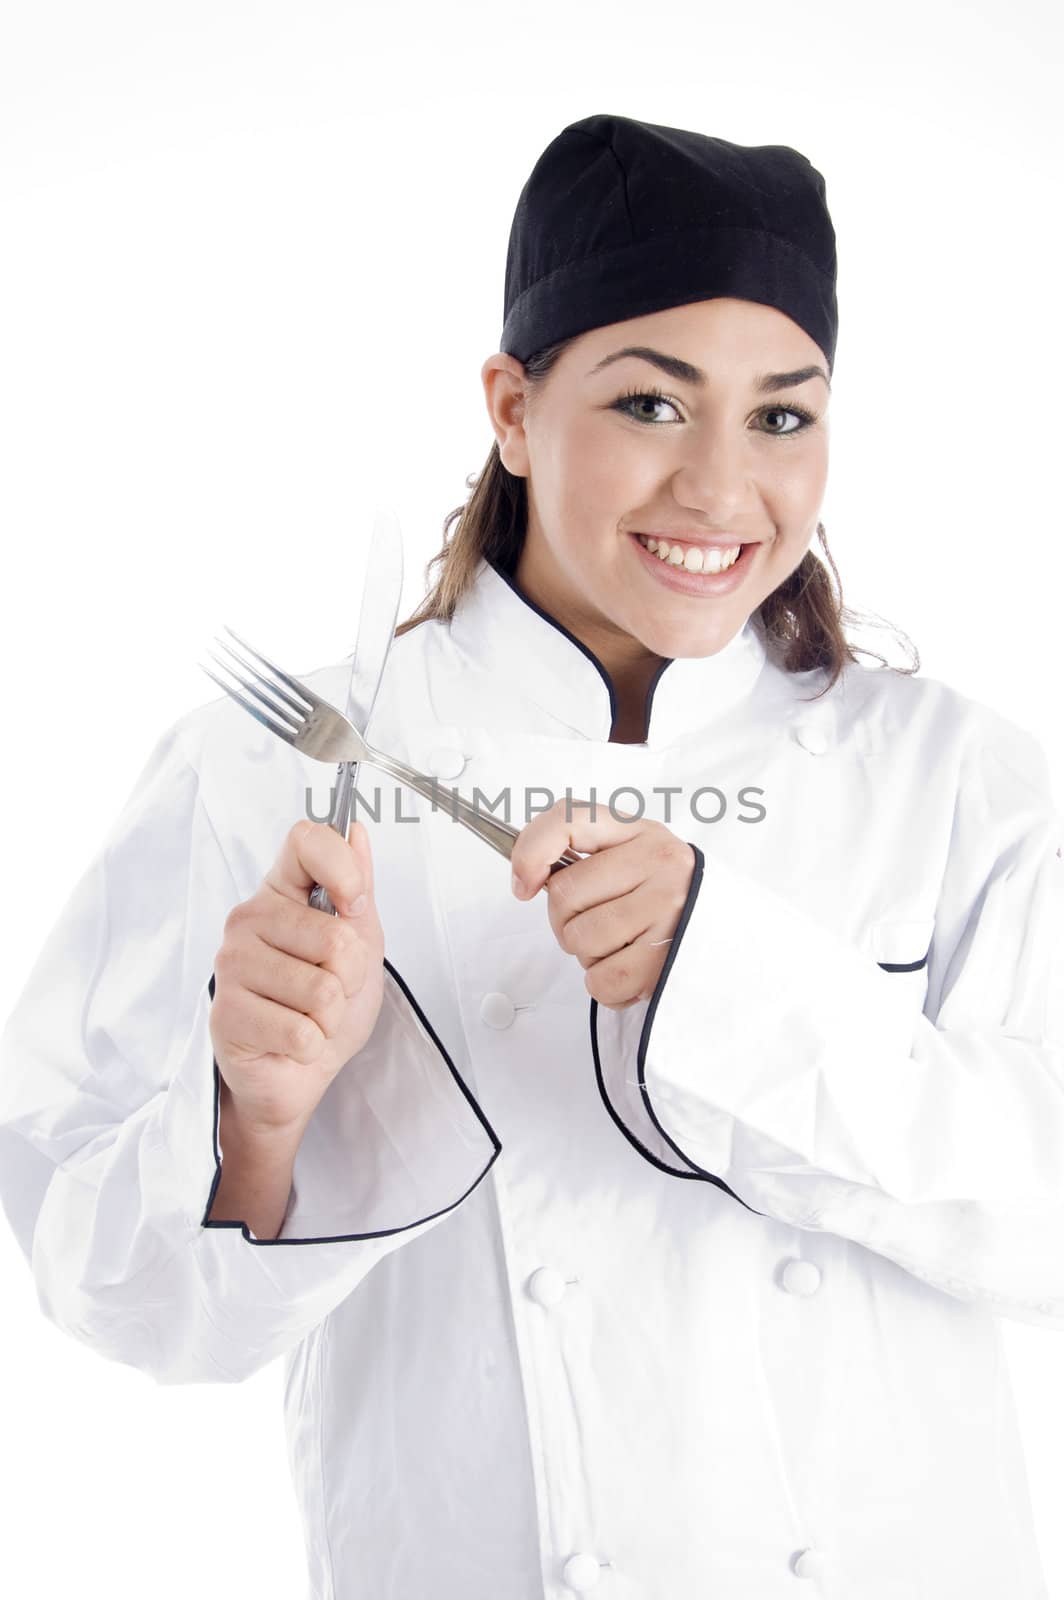 young chef holding metal cutlery with white background